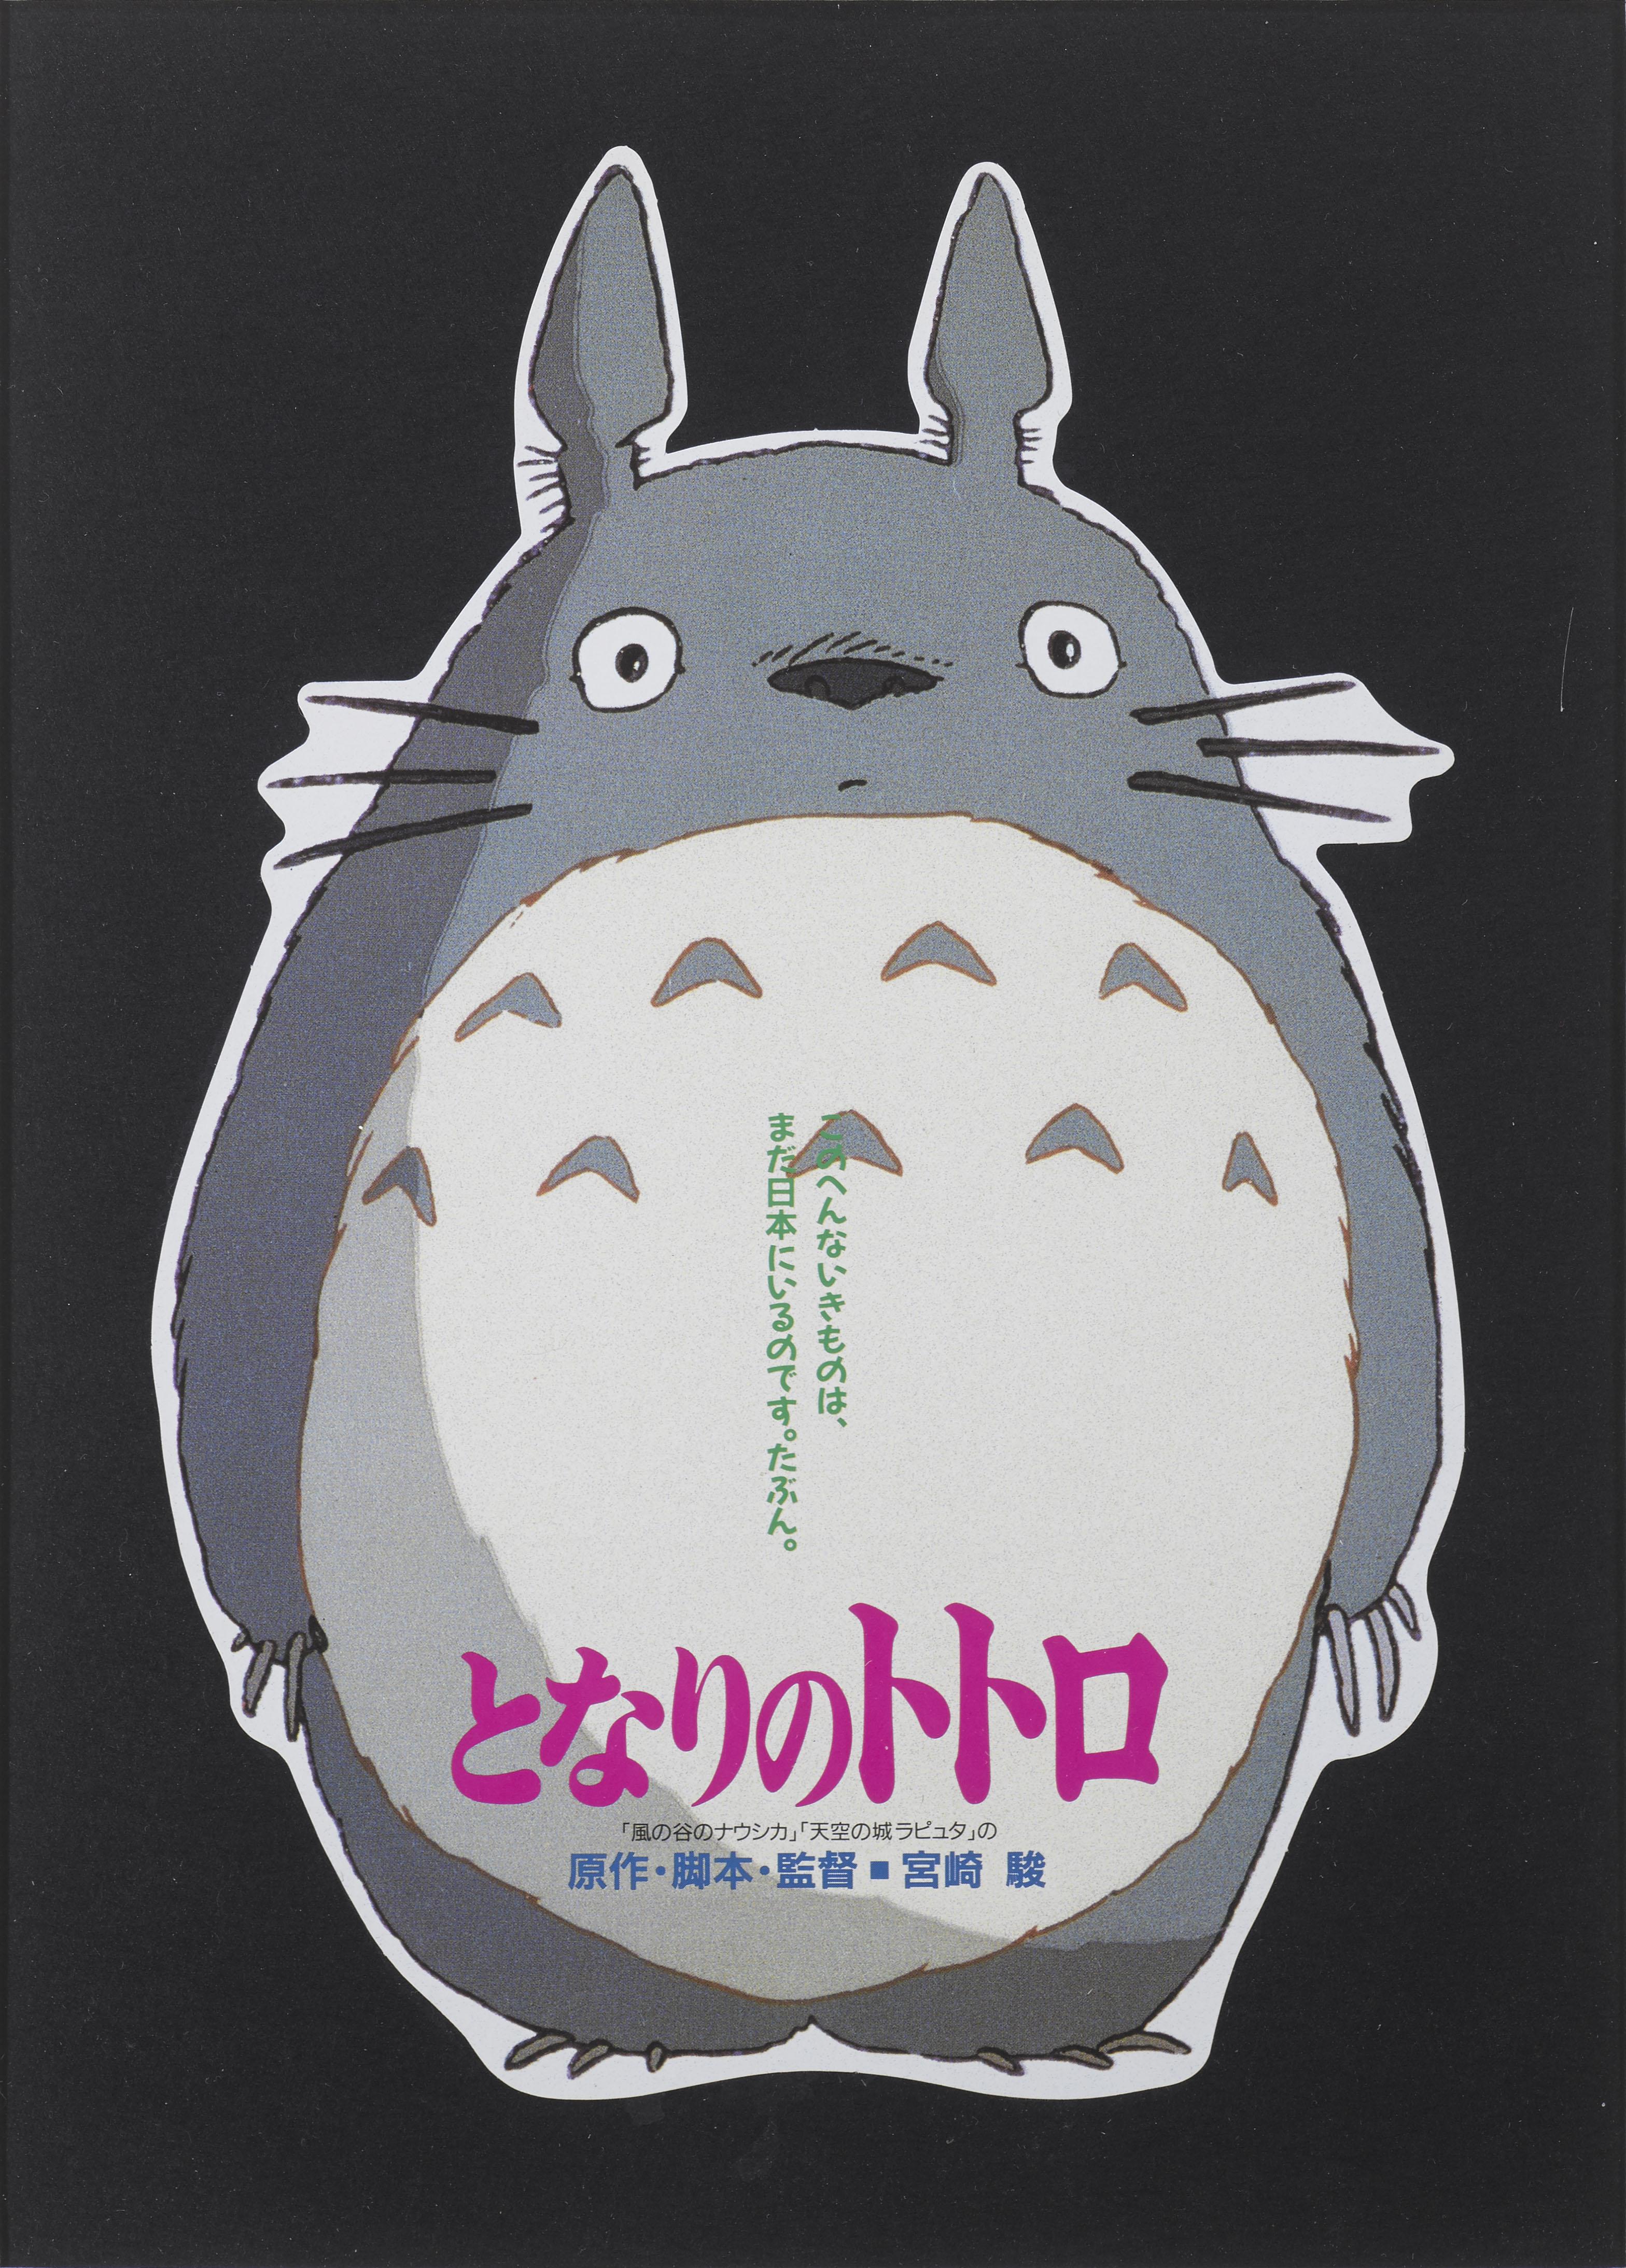 Original Japanese mini flyer for the 1988 studio Ghibli animation.
Hayao Miyazaki, one of the founders of Studio Ghibli, wrote and directed this film. Studio Ghibli, which was founded in 1985, has been responsible for making so many magical